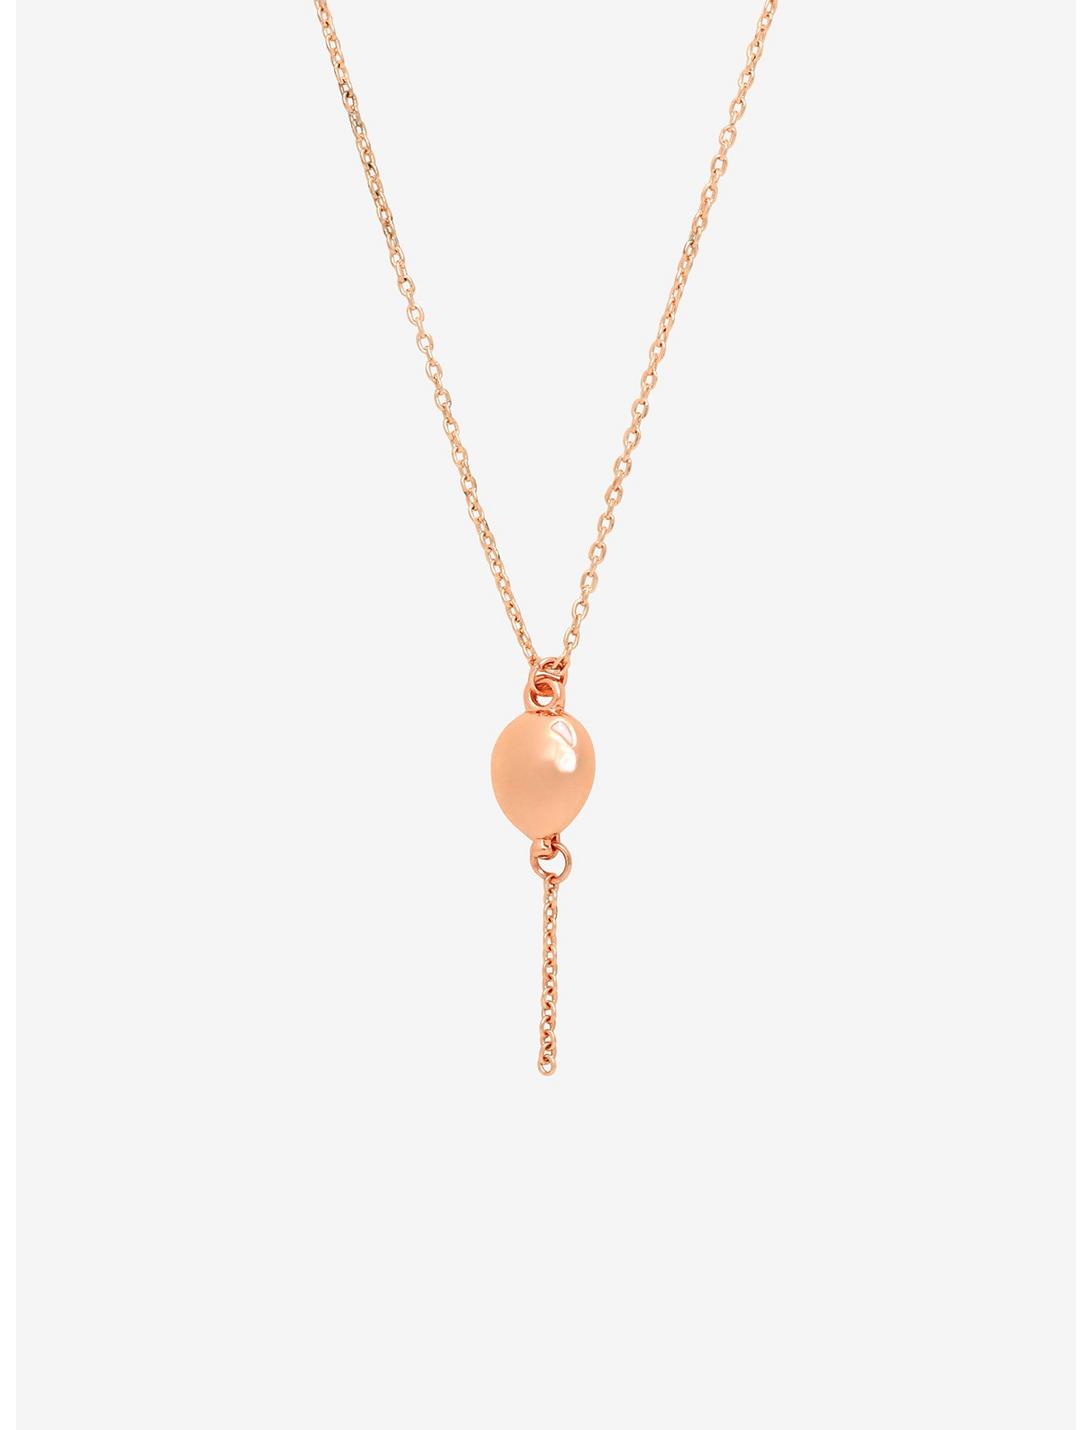 IT Balloon Dainty Charm Necklace, , hi-res